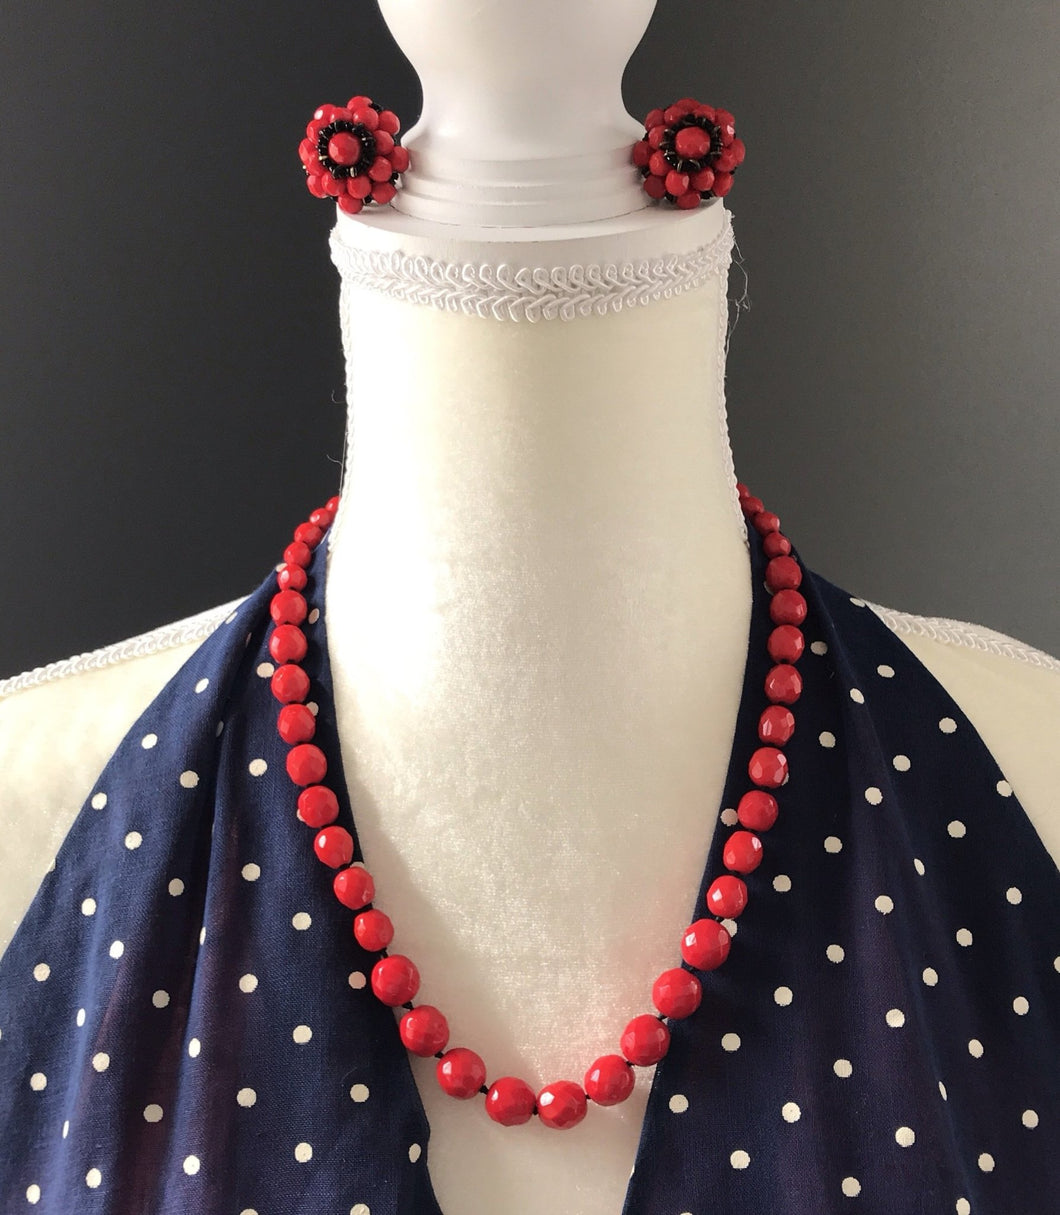 Vintage Red Glass Beaded Necklace and Earring Set by Hattie Carnegie. - Scotch Street Vintage